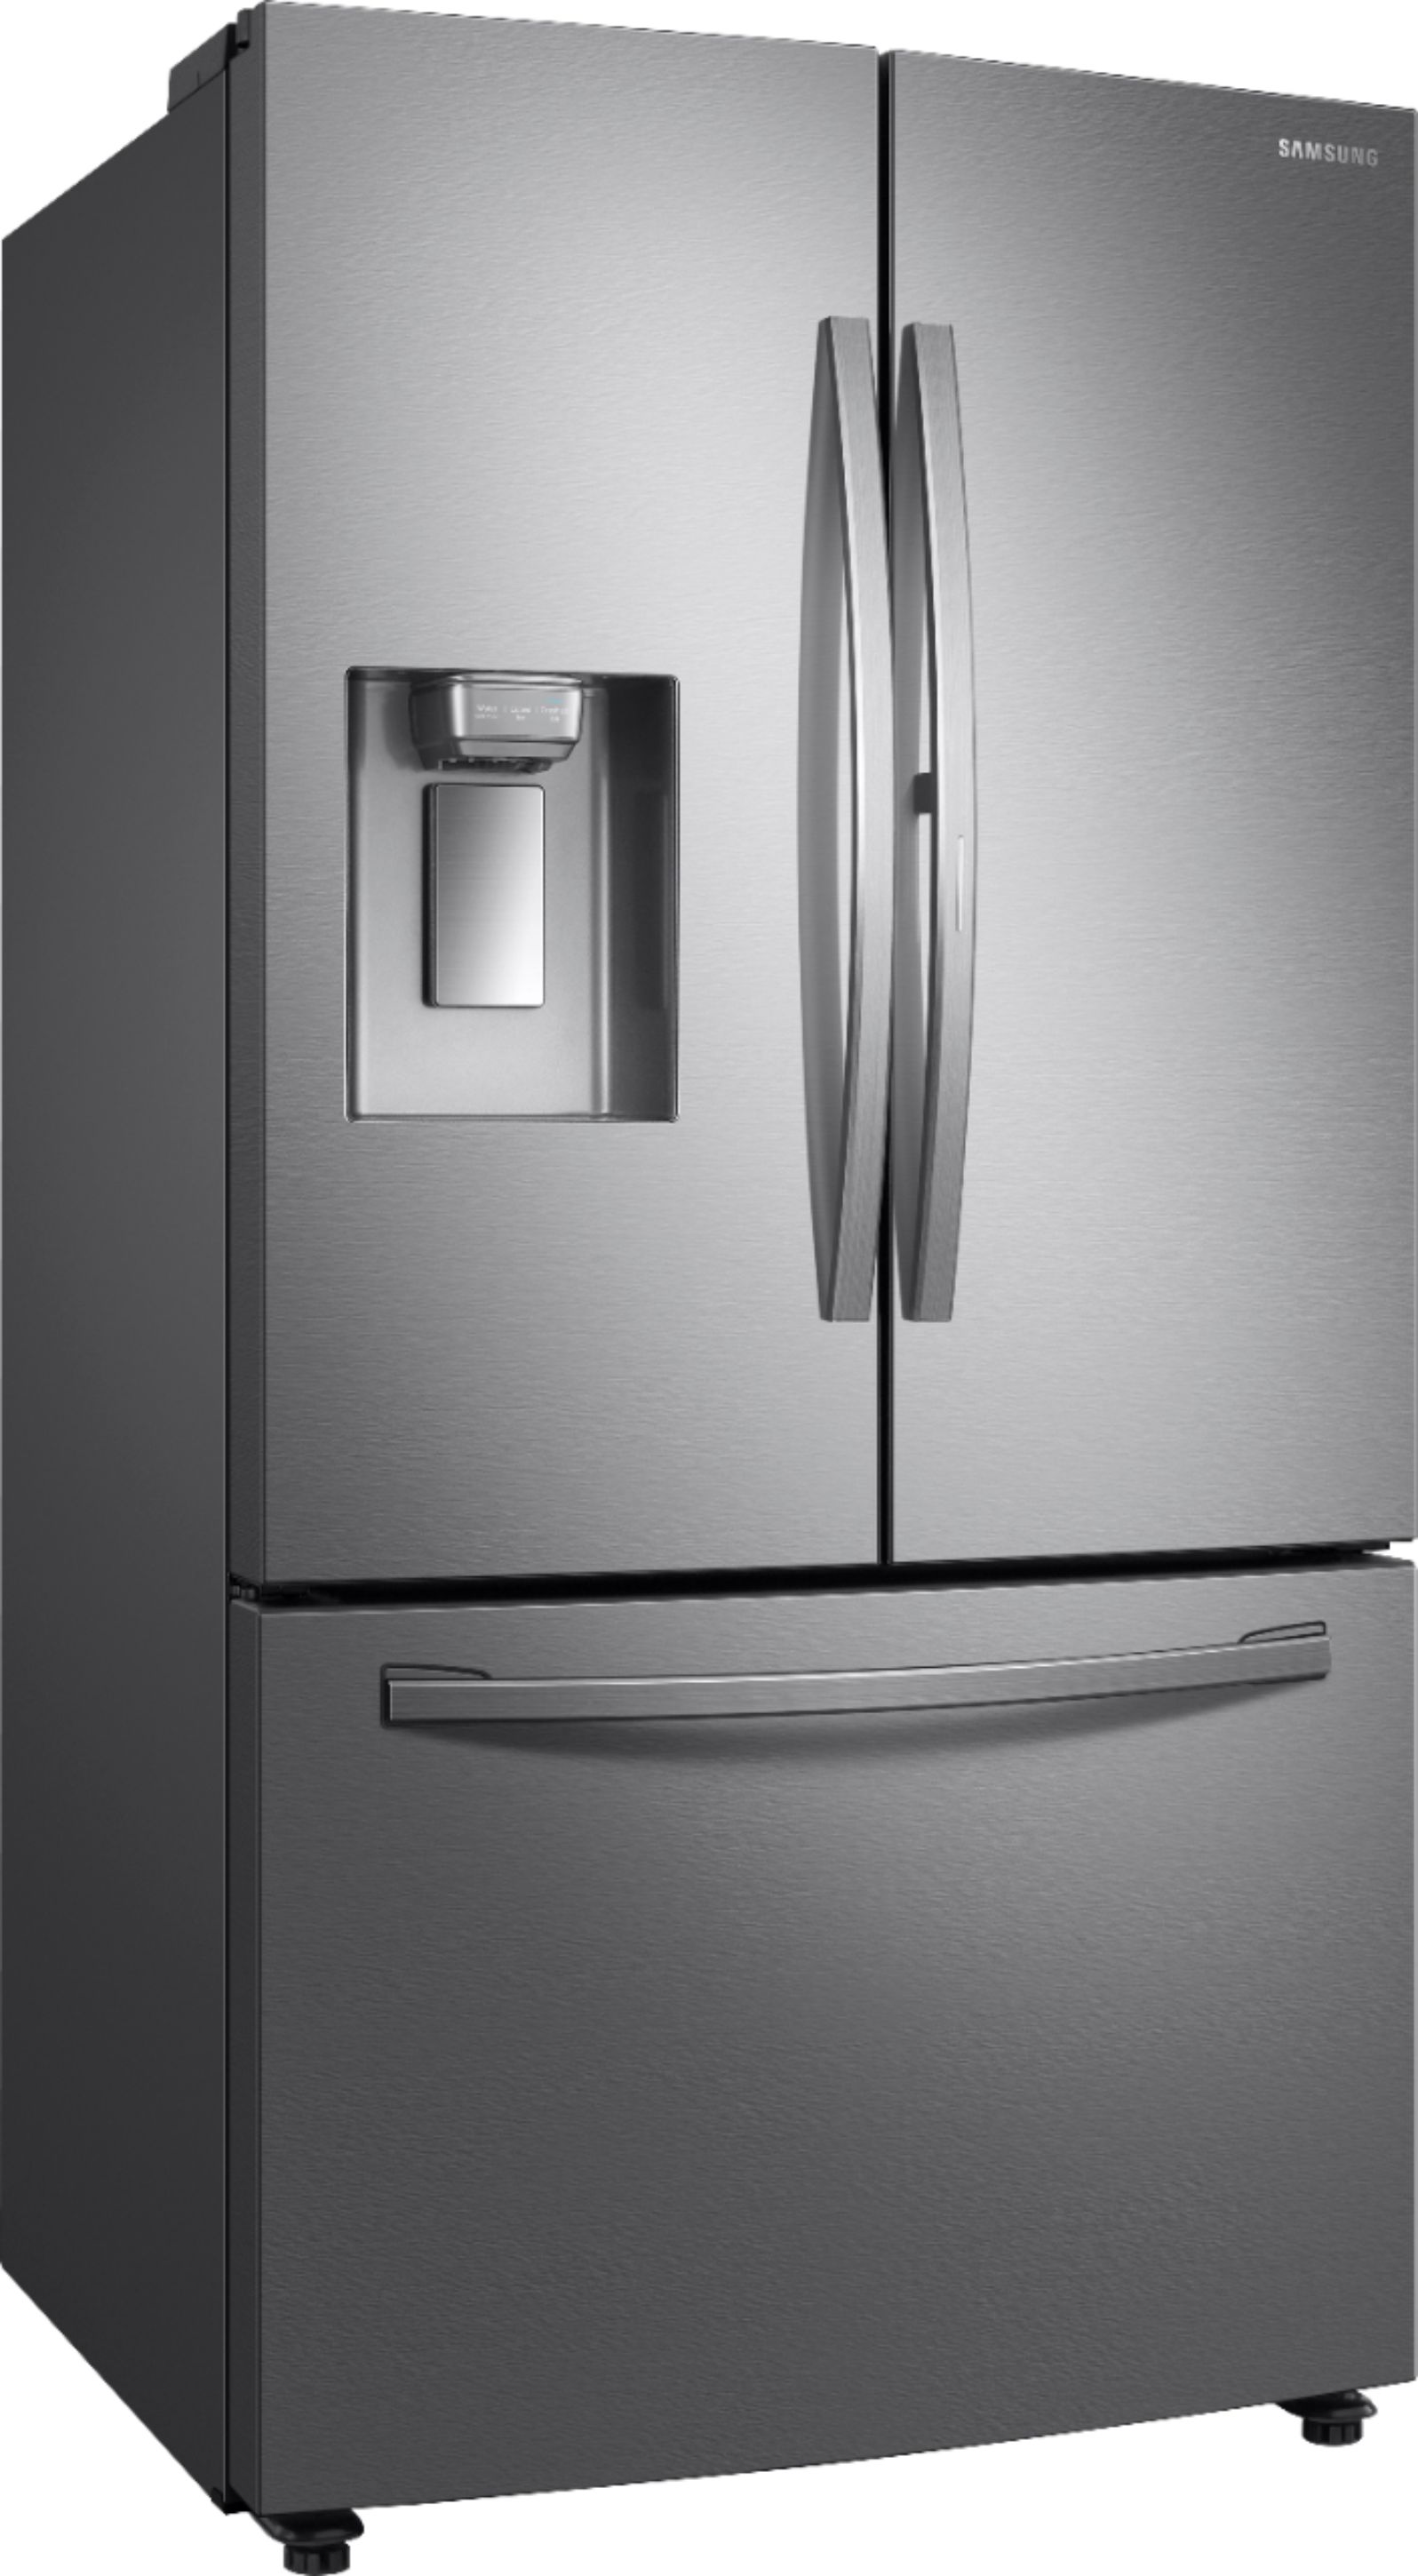 Angle View: Samsung - 27.8 Cu. Ft. French Door Fingerprint Resistant Refrigerator with Food Showcase - Stainless steel